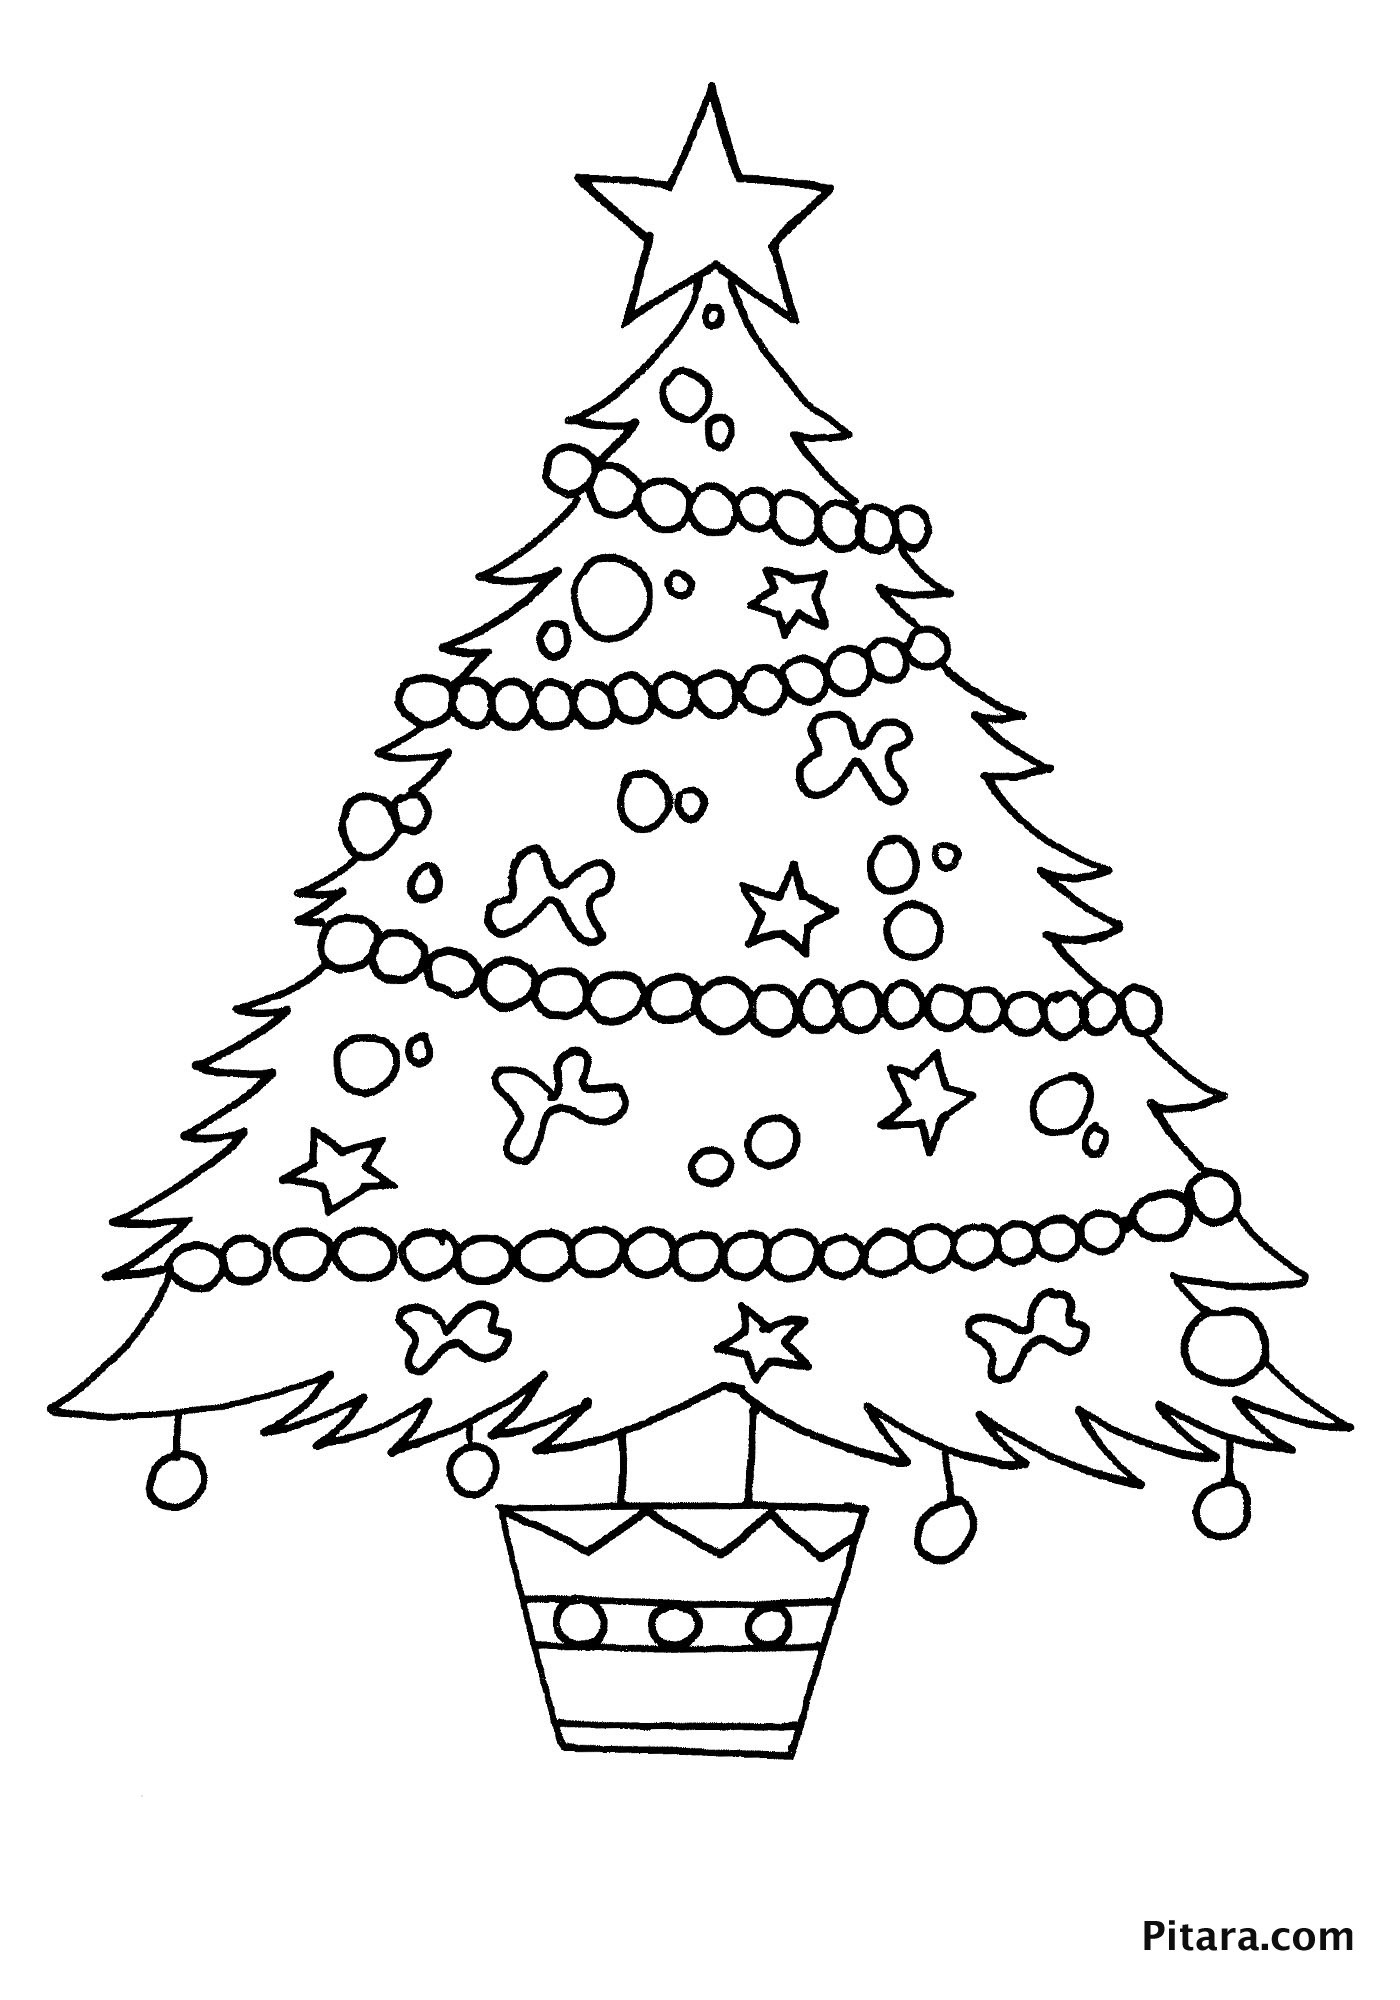 Christmas Tree Coloring Pages For Kids
 Christmas Coloring Pages for Kids